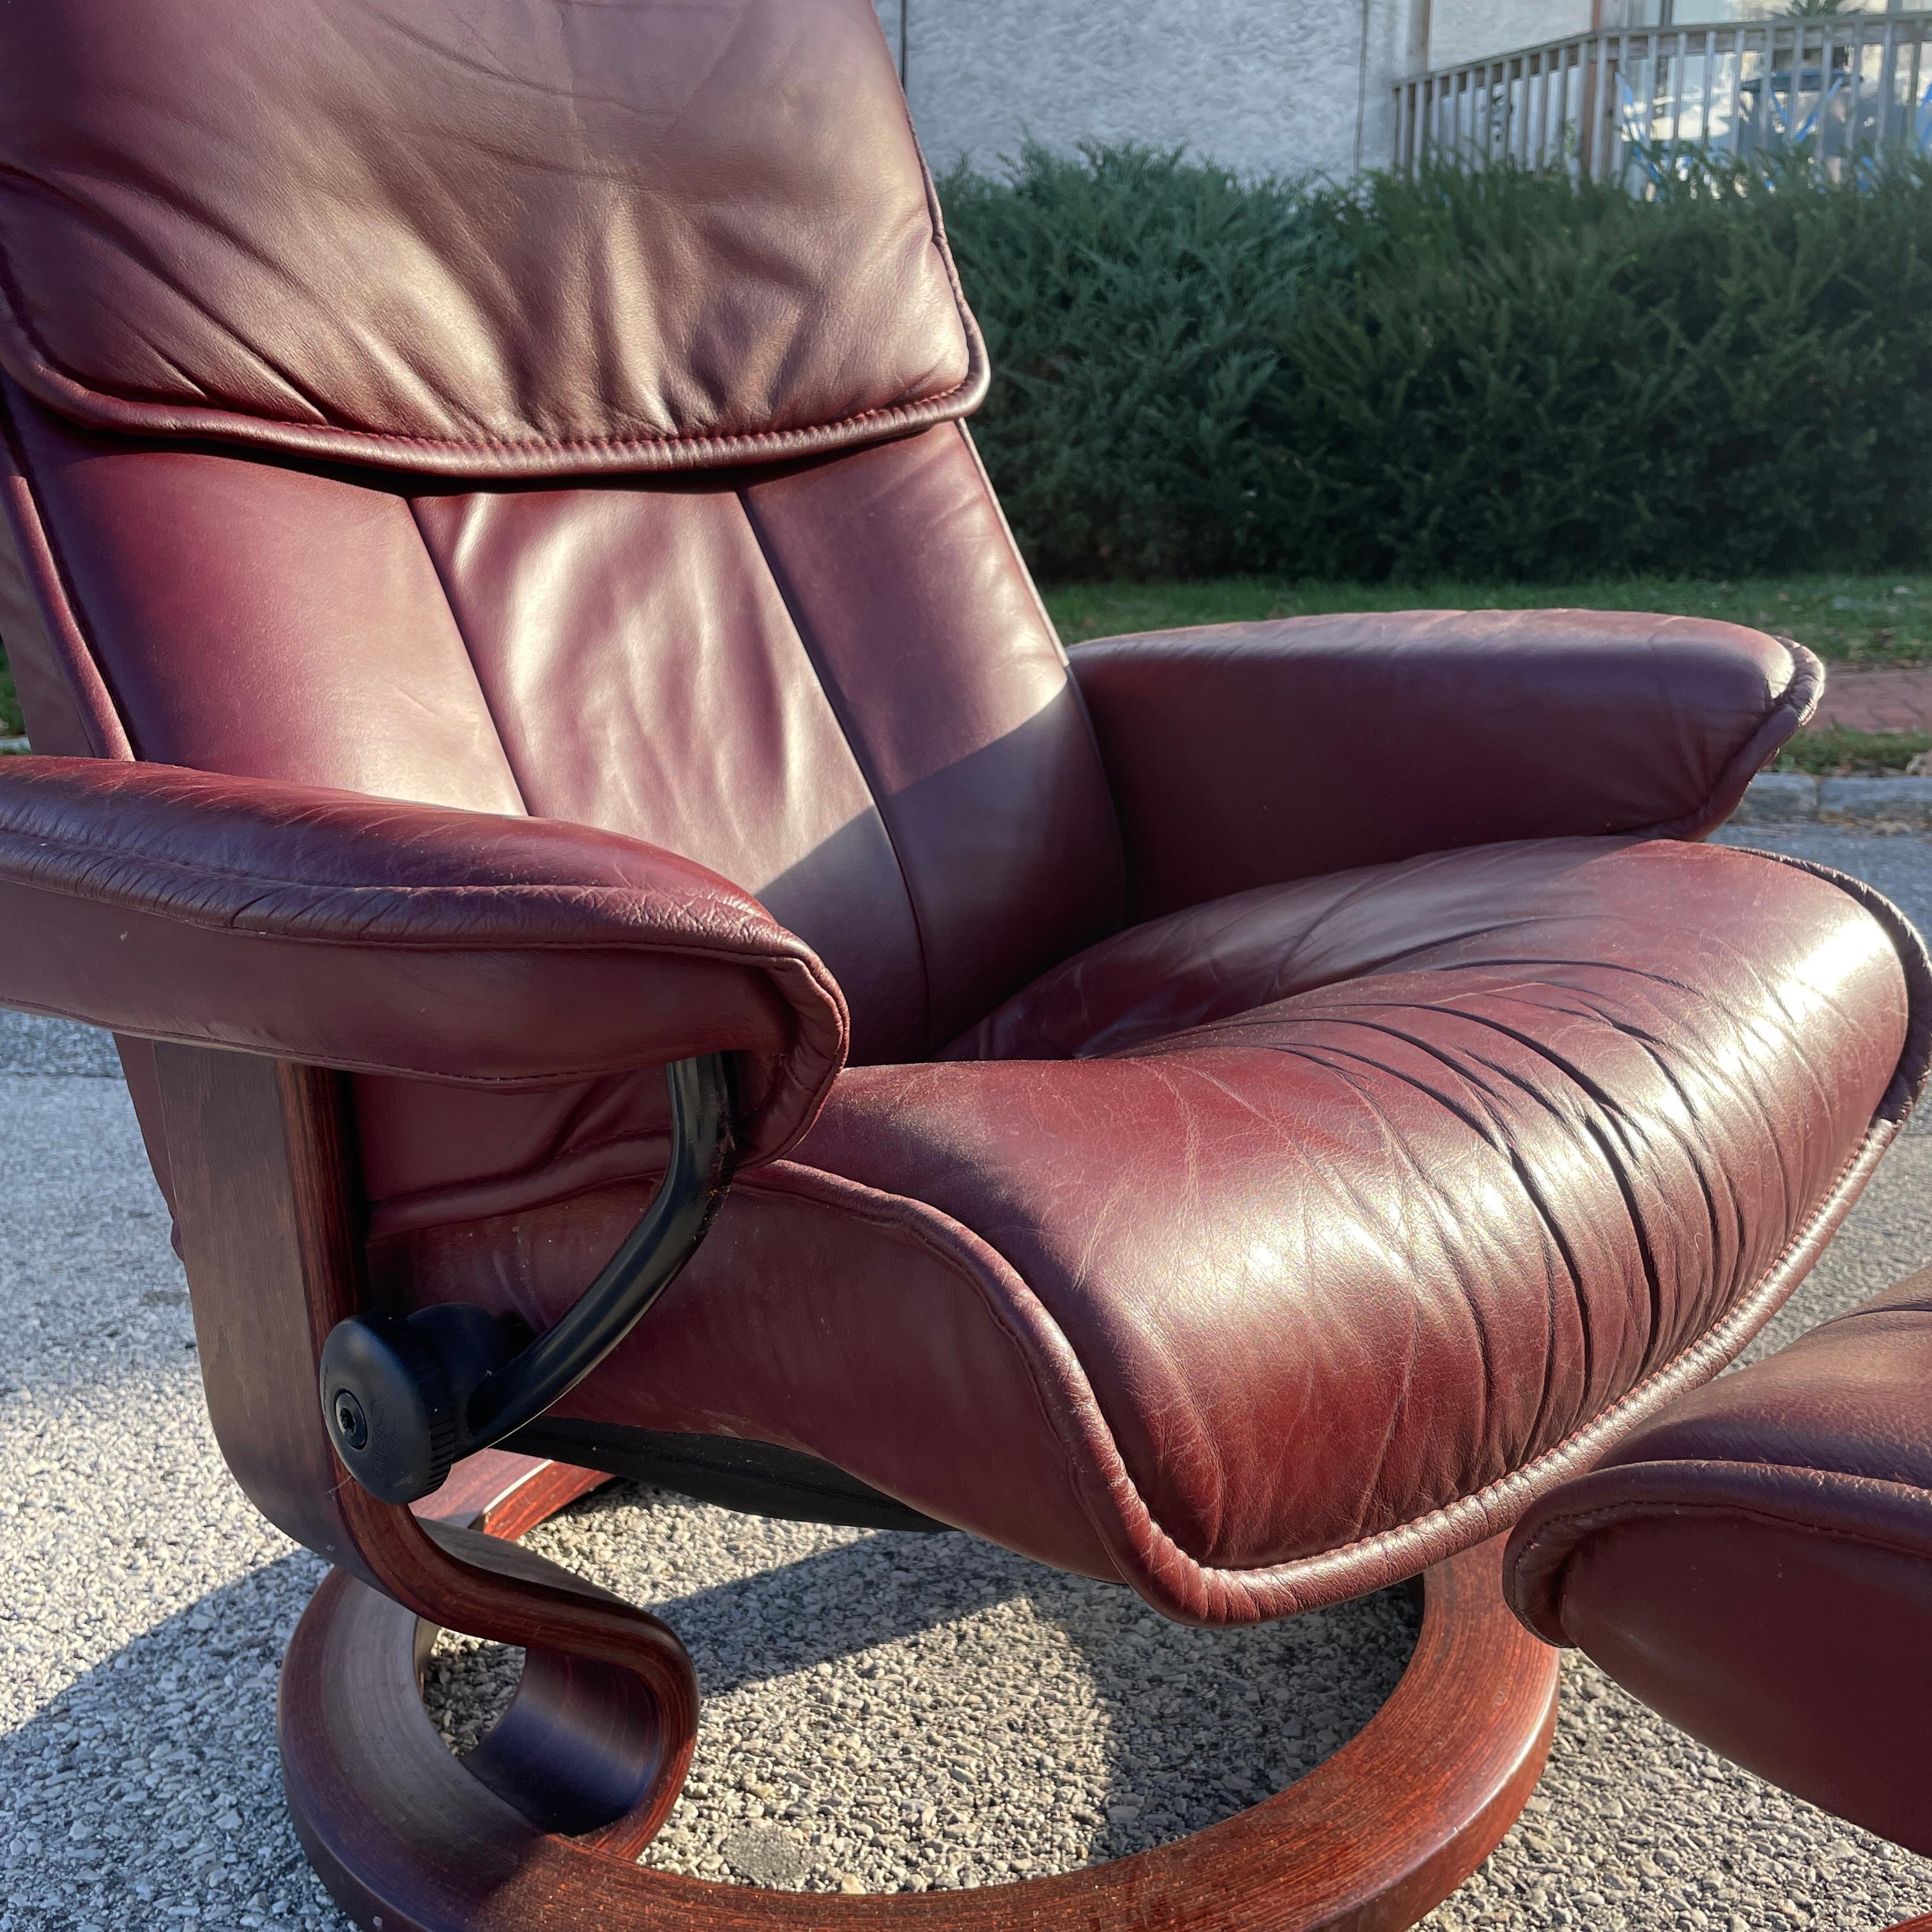 A vintage maroon leather 'Admiral' model armchair and ottoman by Ekornes Stressless of Norway. The chair has an adjustable headrest and locking recline function. It is very comfortable and the leather is in good vintage condition with only a couple